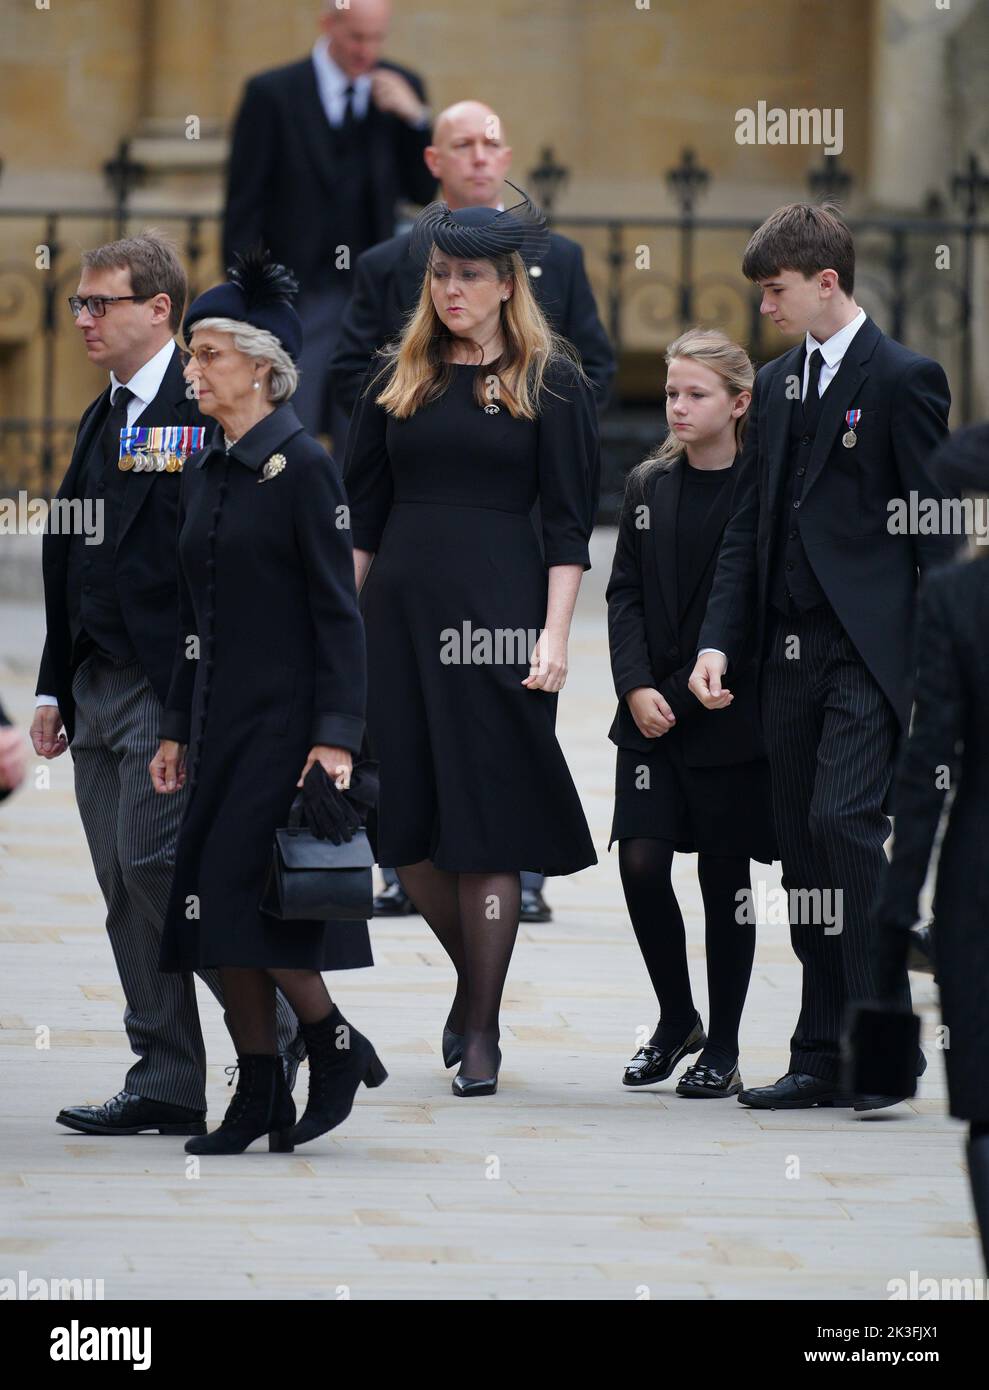 (left to right) The Earl of Ulster, the Duchess of Gloucester, the Countess of Ulster, Lord Culloden and Lady Cosima Windsor arrive at the State Funeral of Queen Elizabeth II, held at Westminster Abbey, London. Picture date: Monday September 19, 2022. Stock Photo